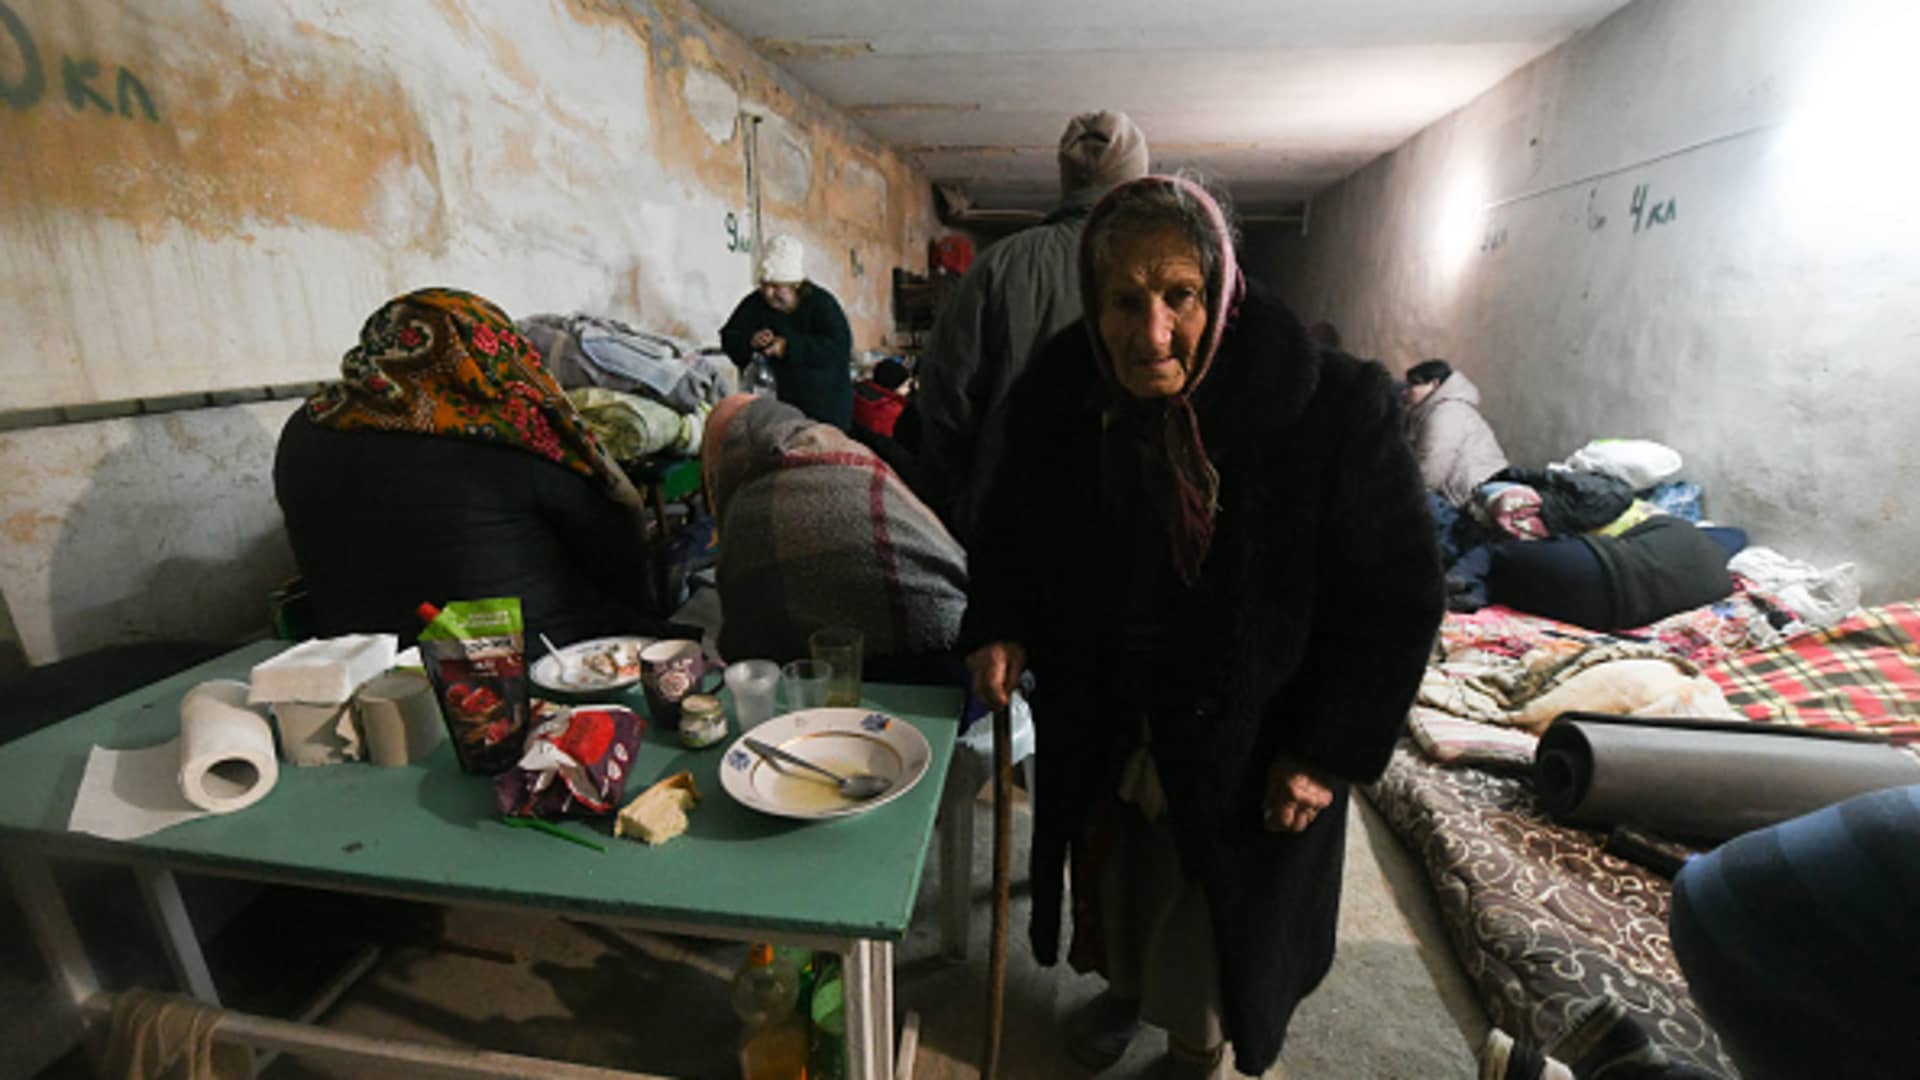 Residents stay in a bomb shelter after recent shellings in the separatist-controlled settlements in Mykolayivkaand Bugas in the Donetsk regionof Ukraine on March 01, 2022.